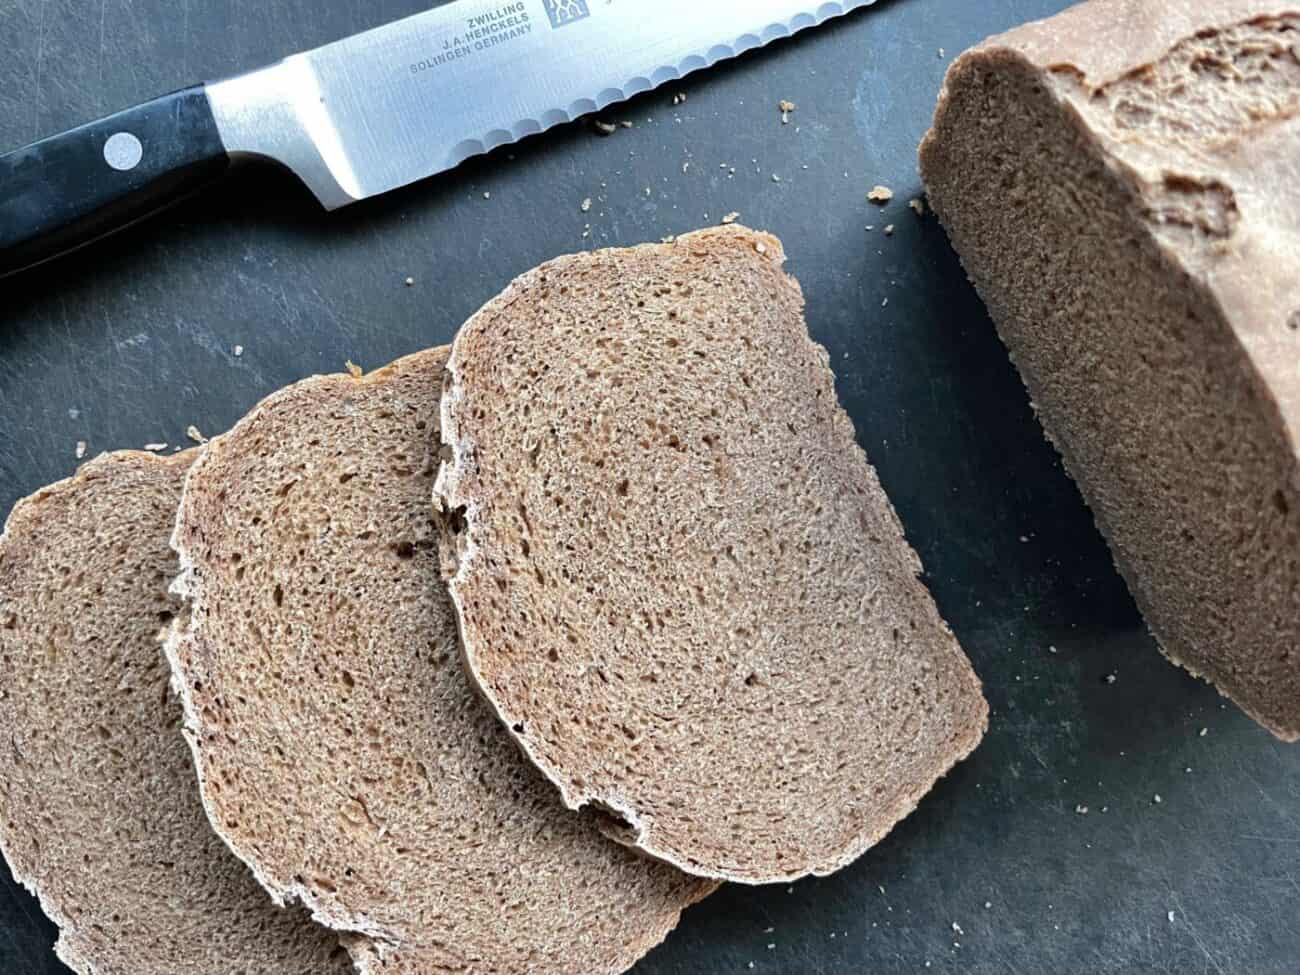 sliced loaf of Russian rye sandwich bread and knife on a cutting board.